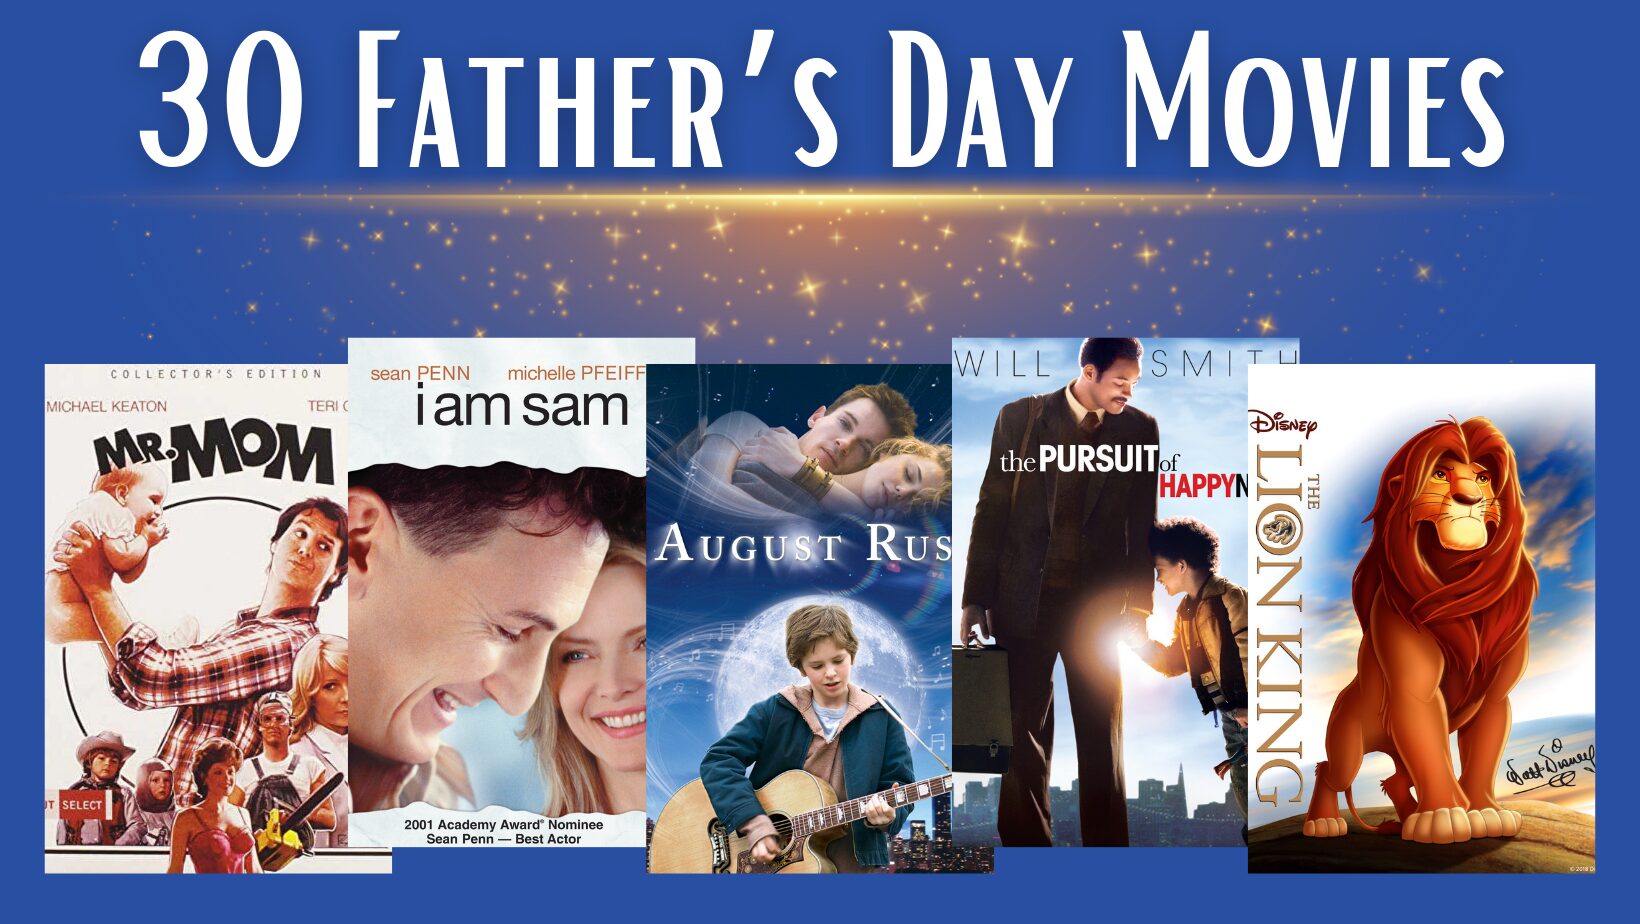 30 Fathers Day Movies: The Best Films to Watch with Dad